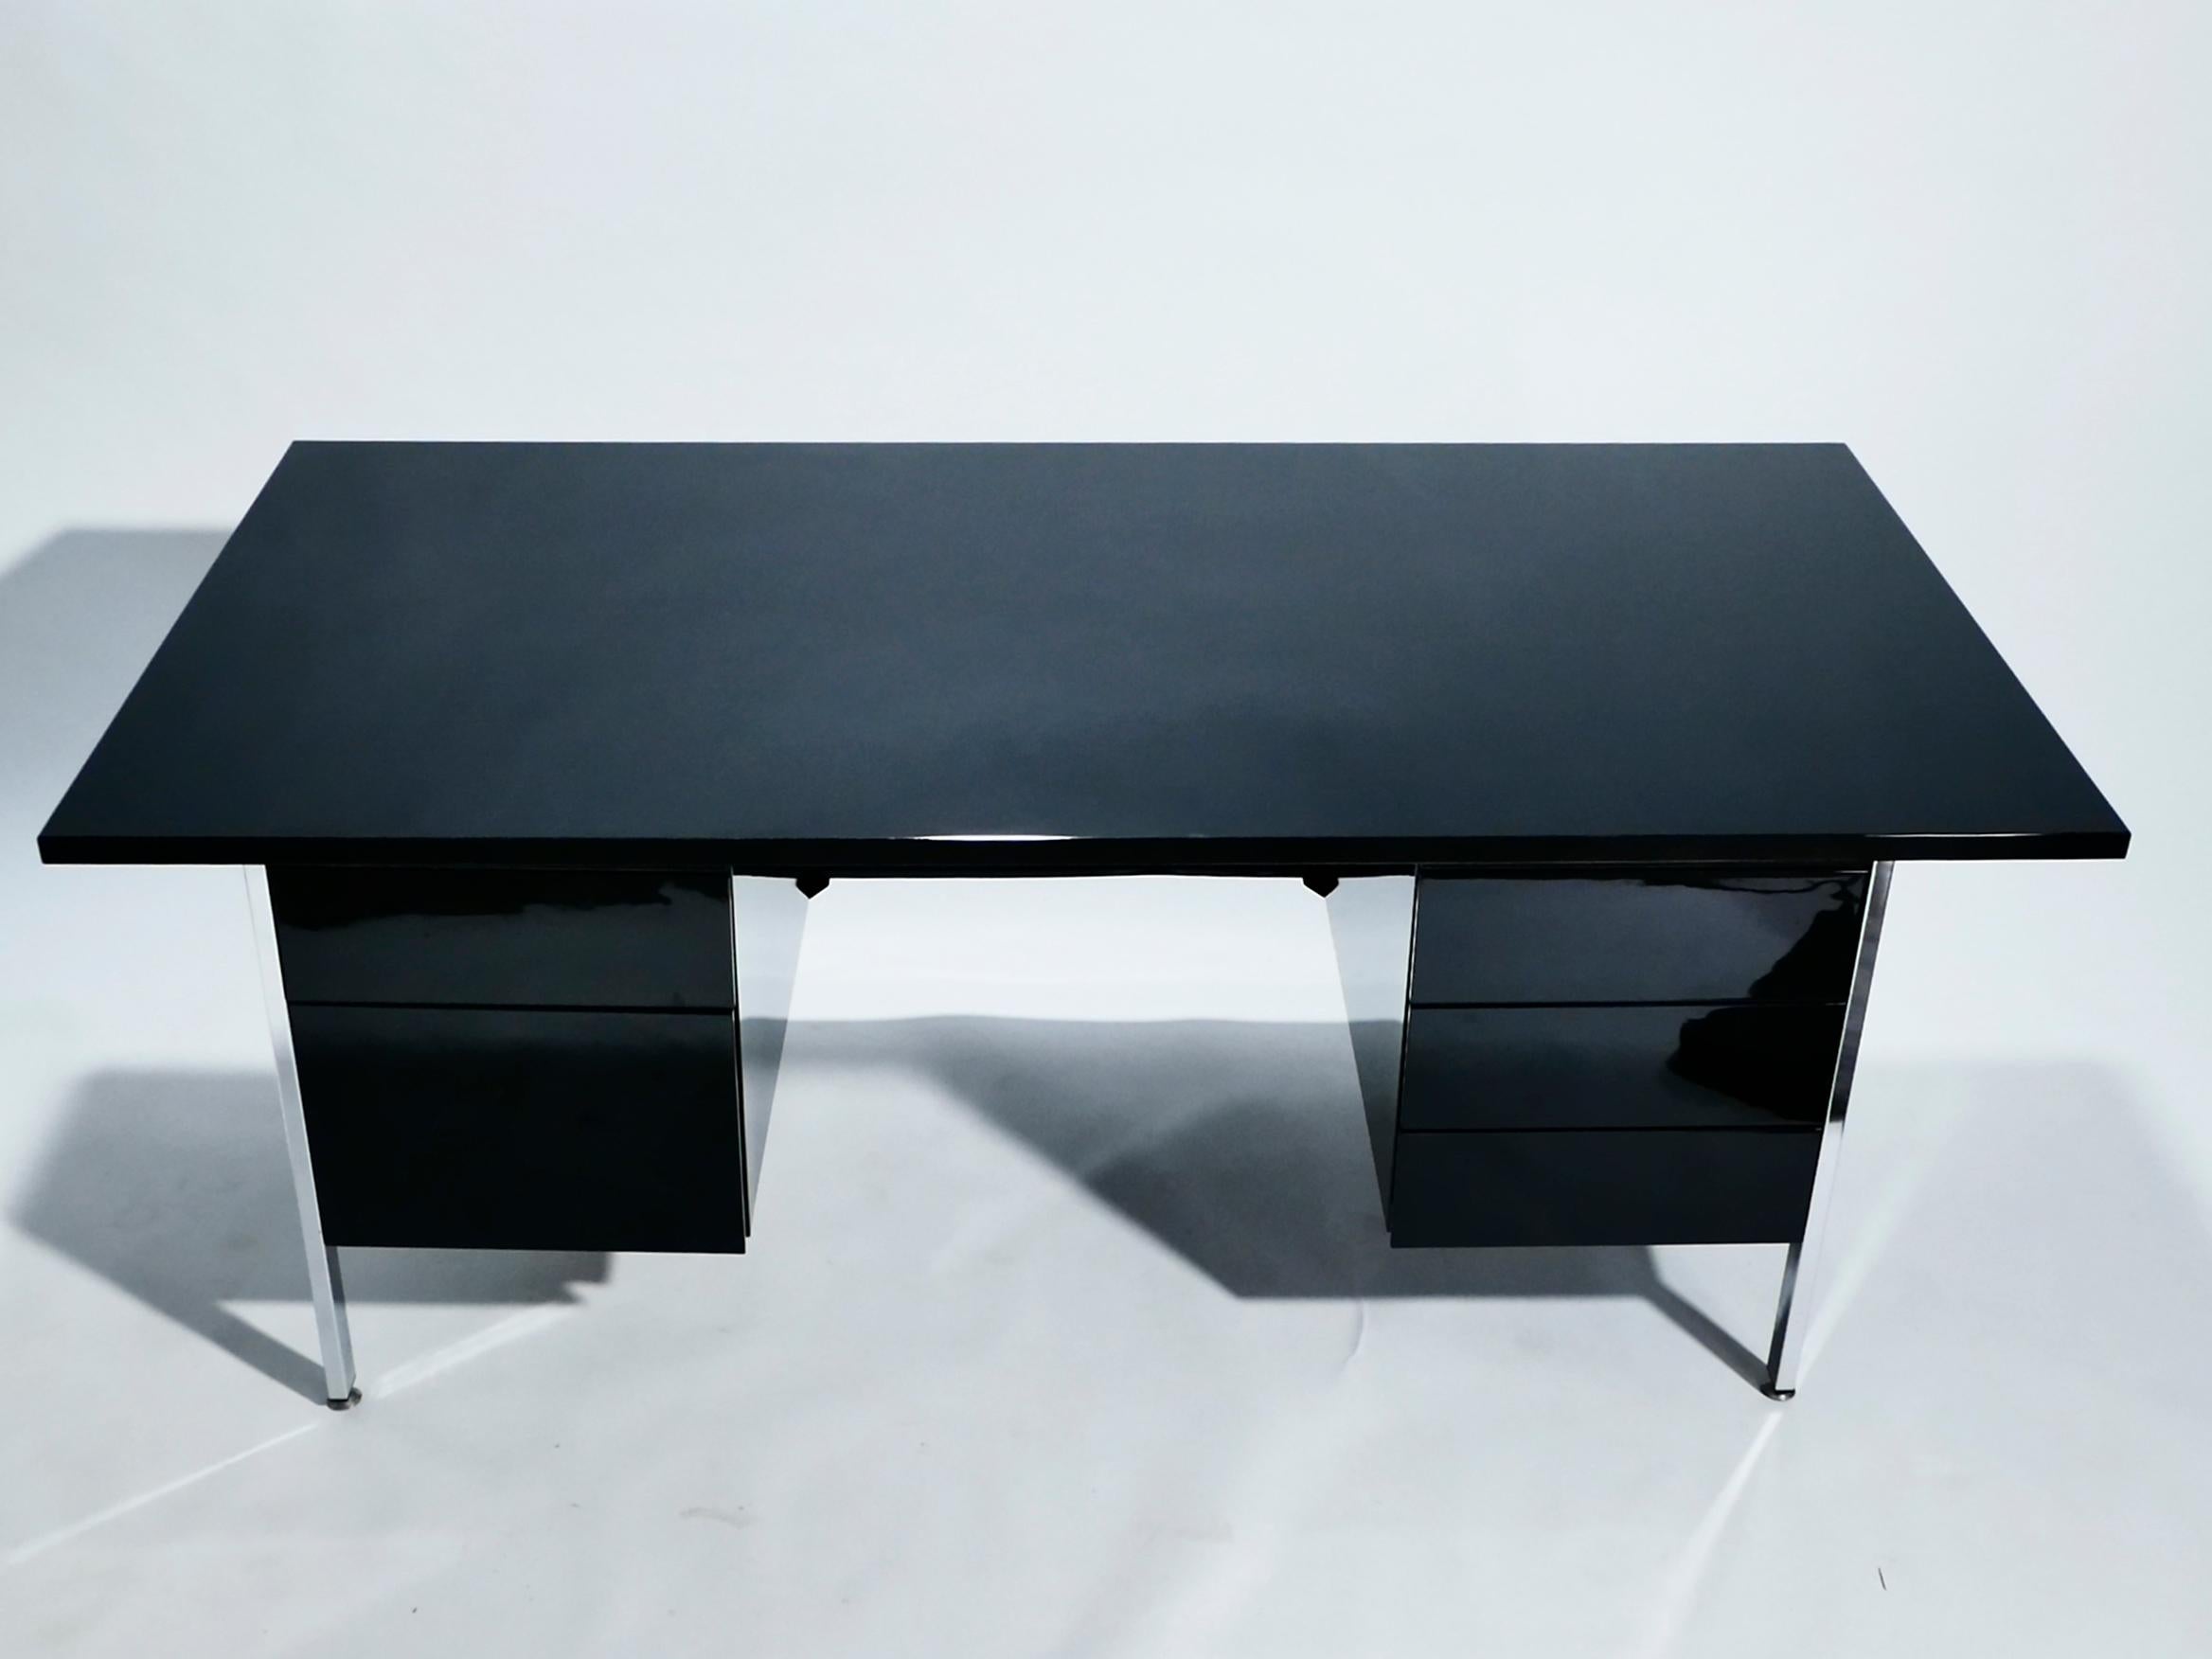 Perfect Mid-Century Modern proportions, designed by Florence Knoll for Knoll International in 1955, this desk model 1503 has a decidedly vintage mood. The black lacquer surfaces and chrome feet and accents look contemporary enough for the piece to